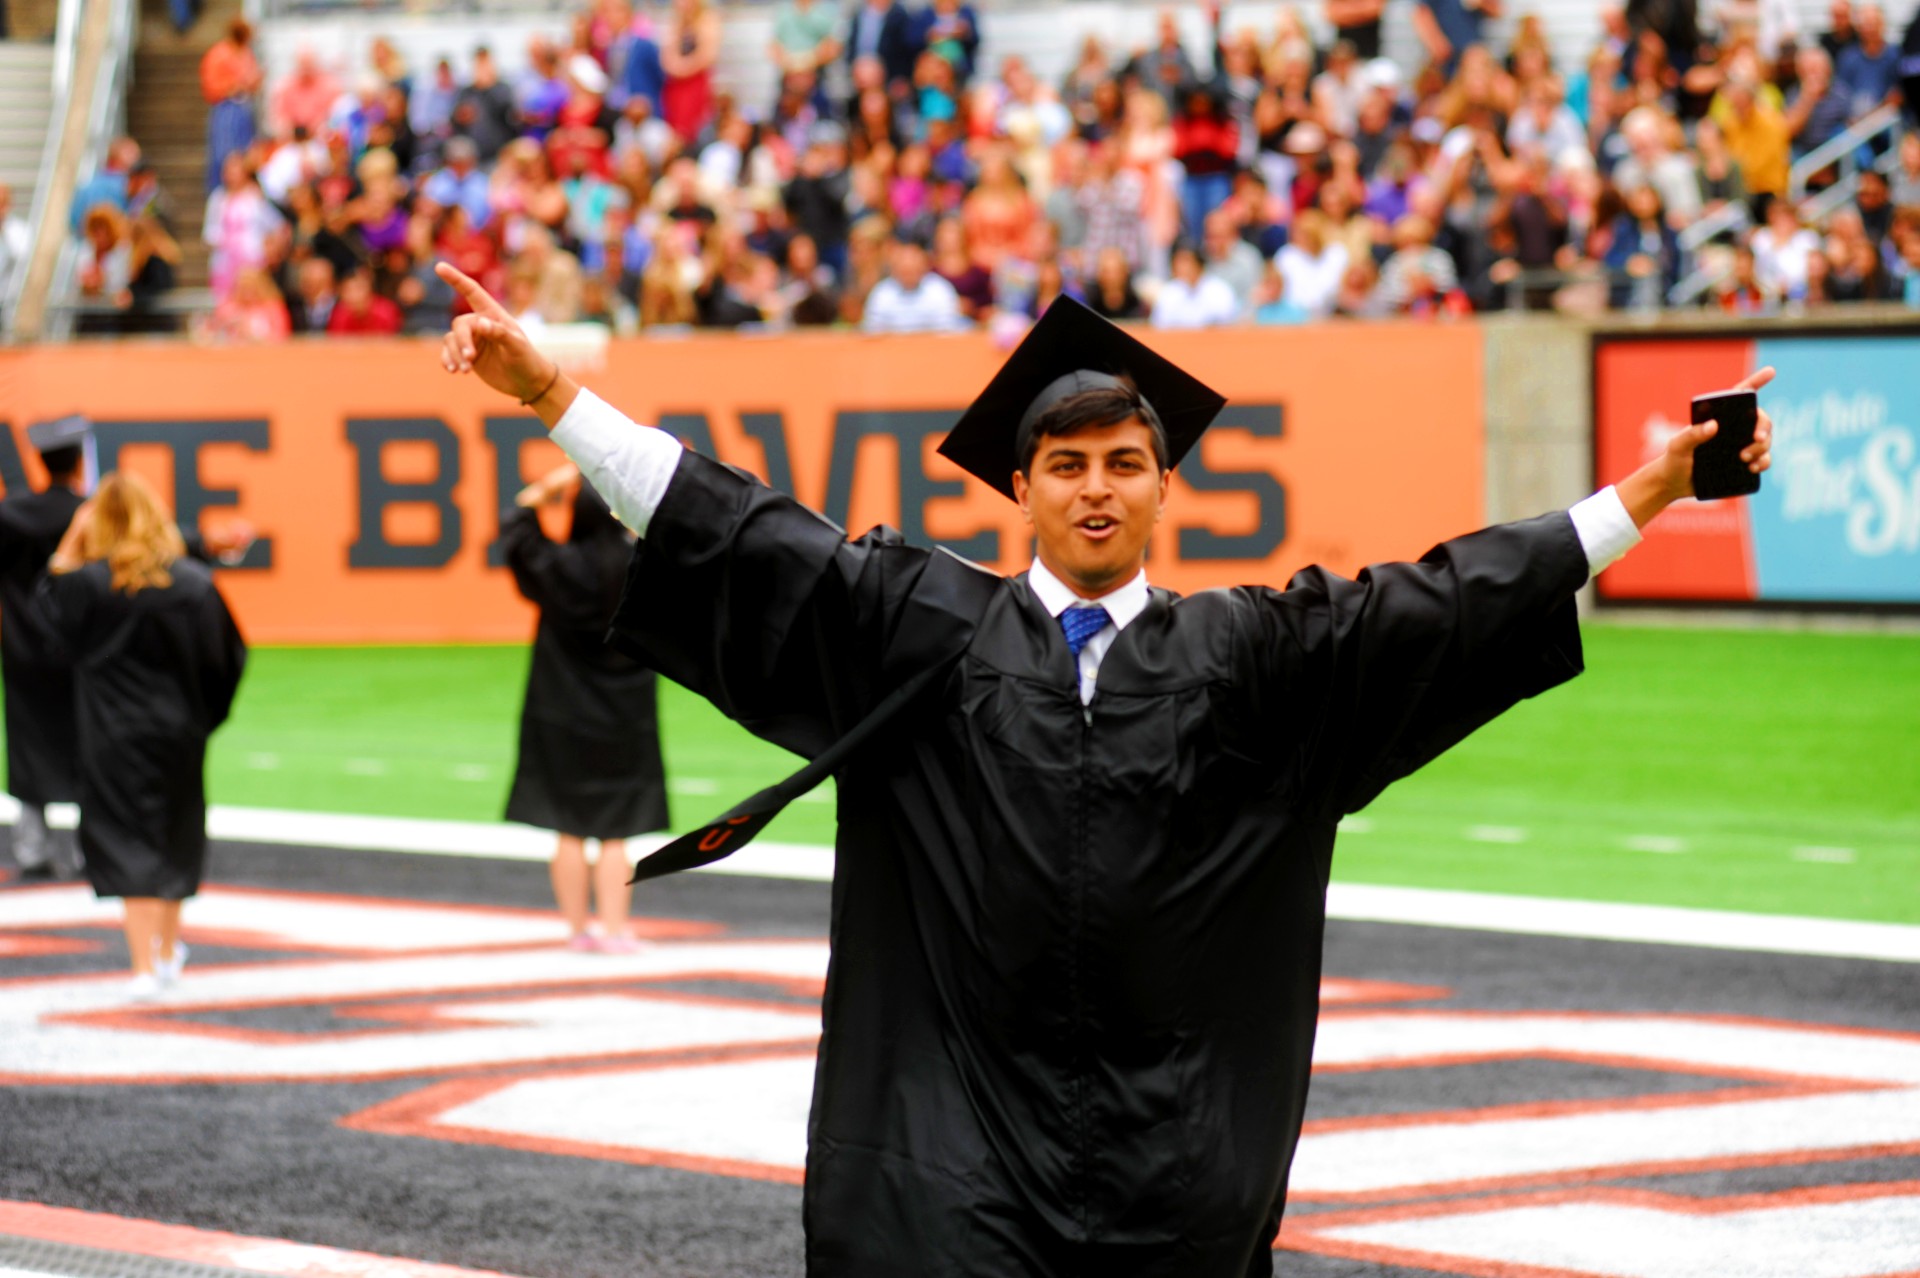 graduate with arms raised at commencement